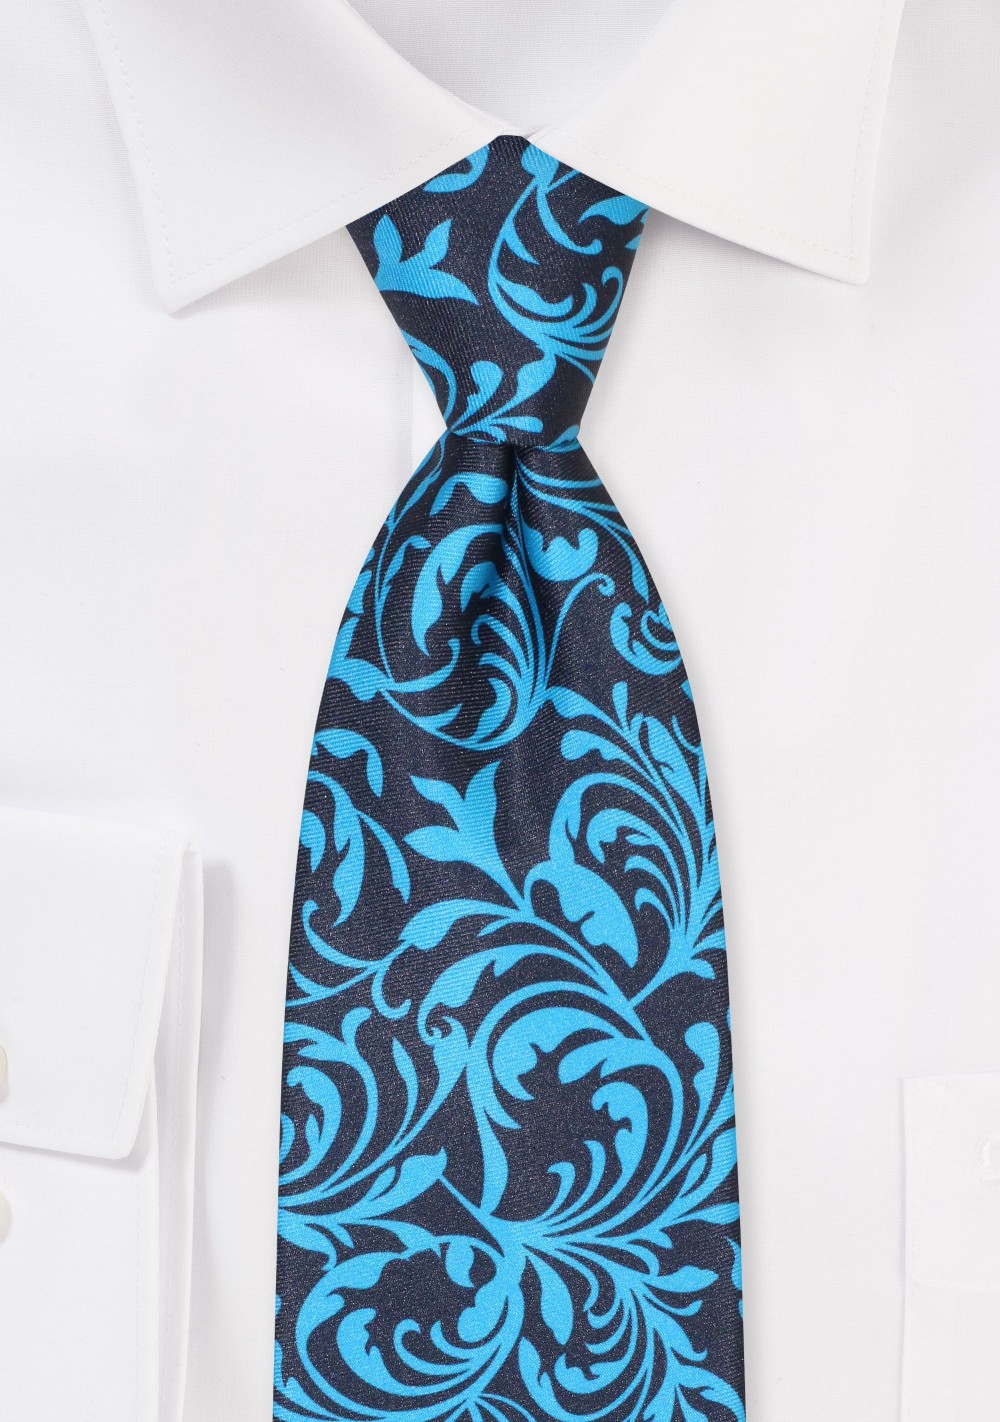 Statement Paisley Tie in Aqua, Red, and Black